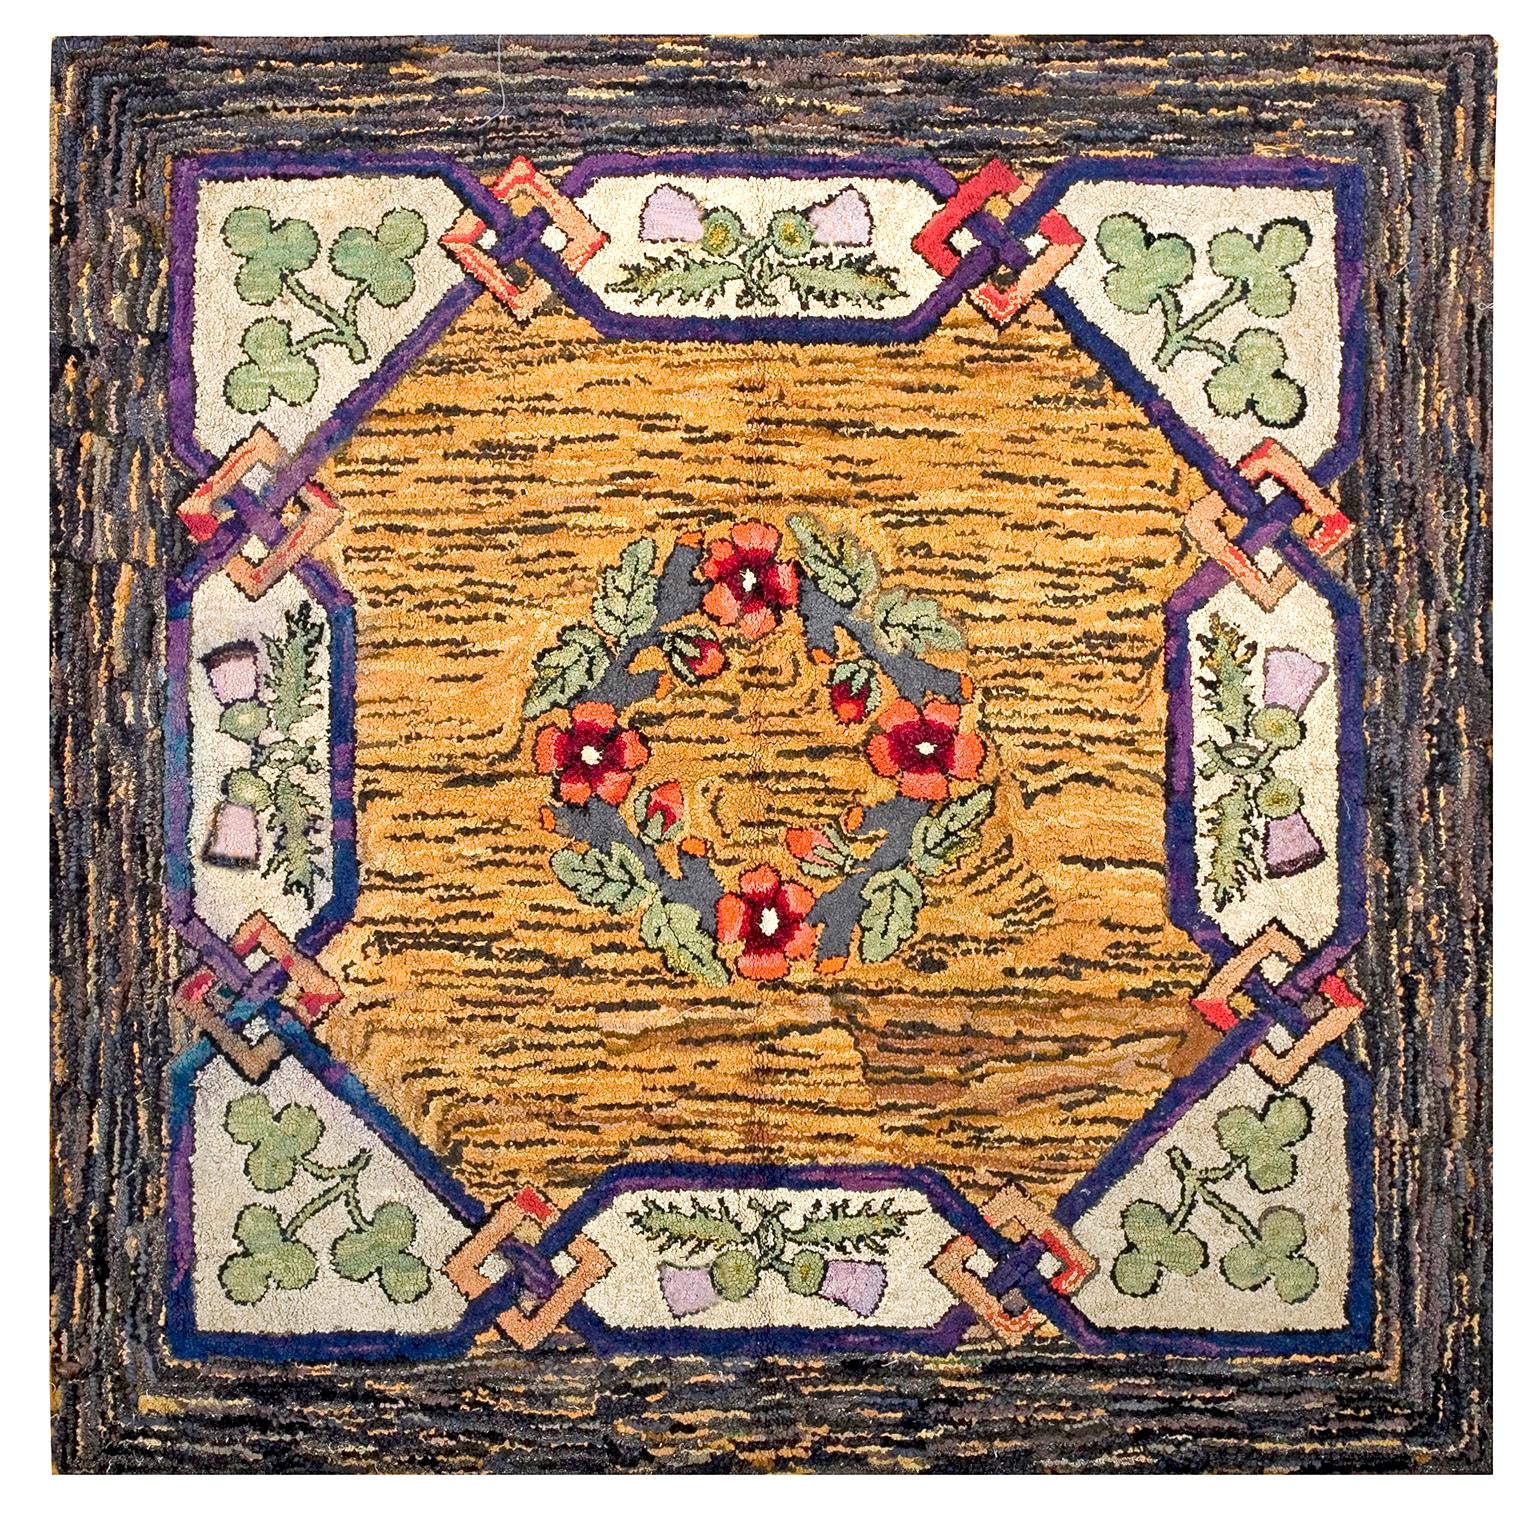 Early 20th Century American Hooked Rug ( 6' x 6' - 183 x 183 ) For Sale